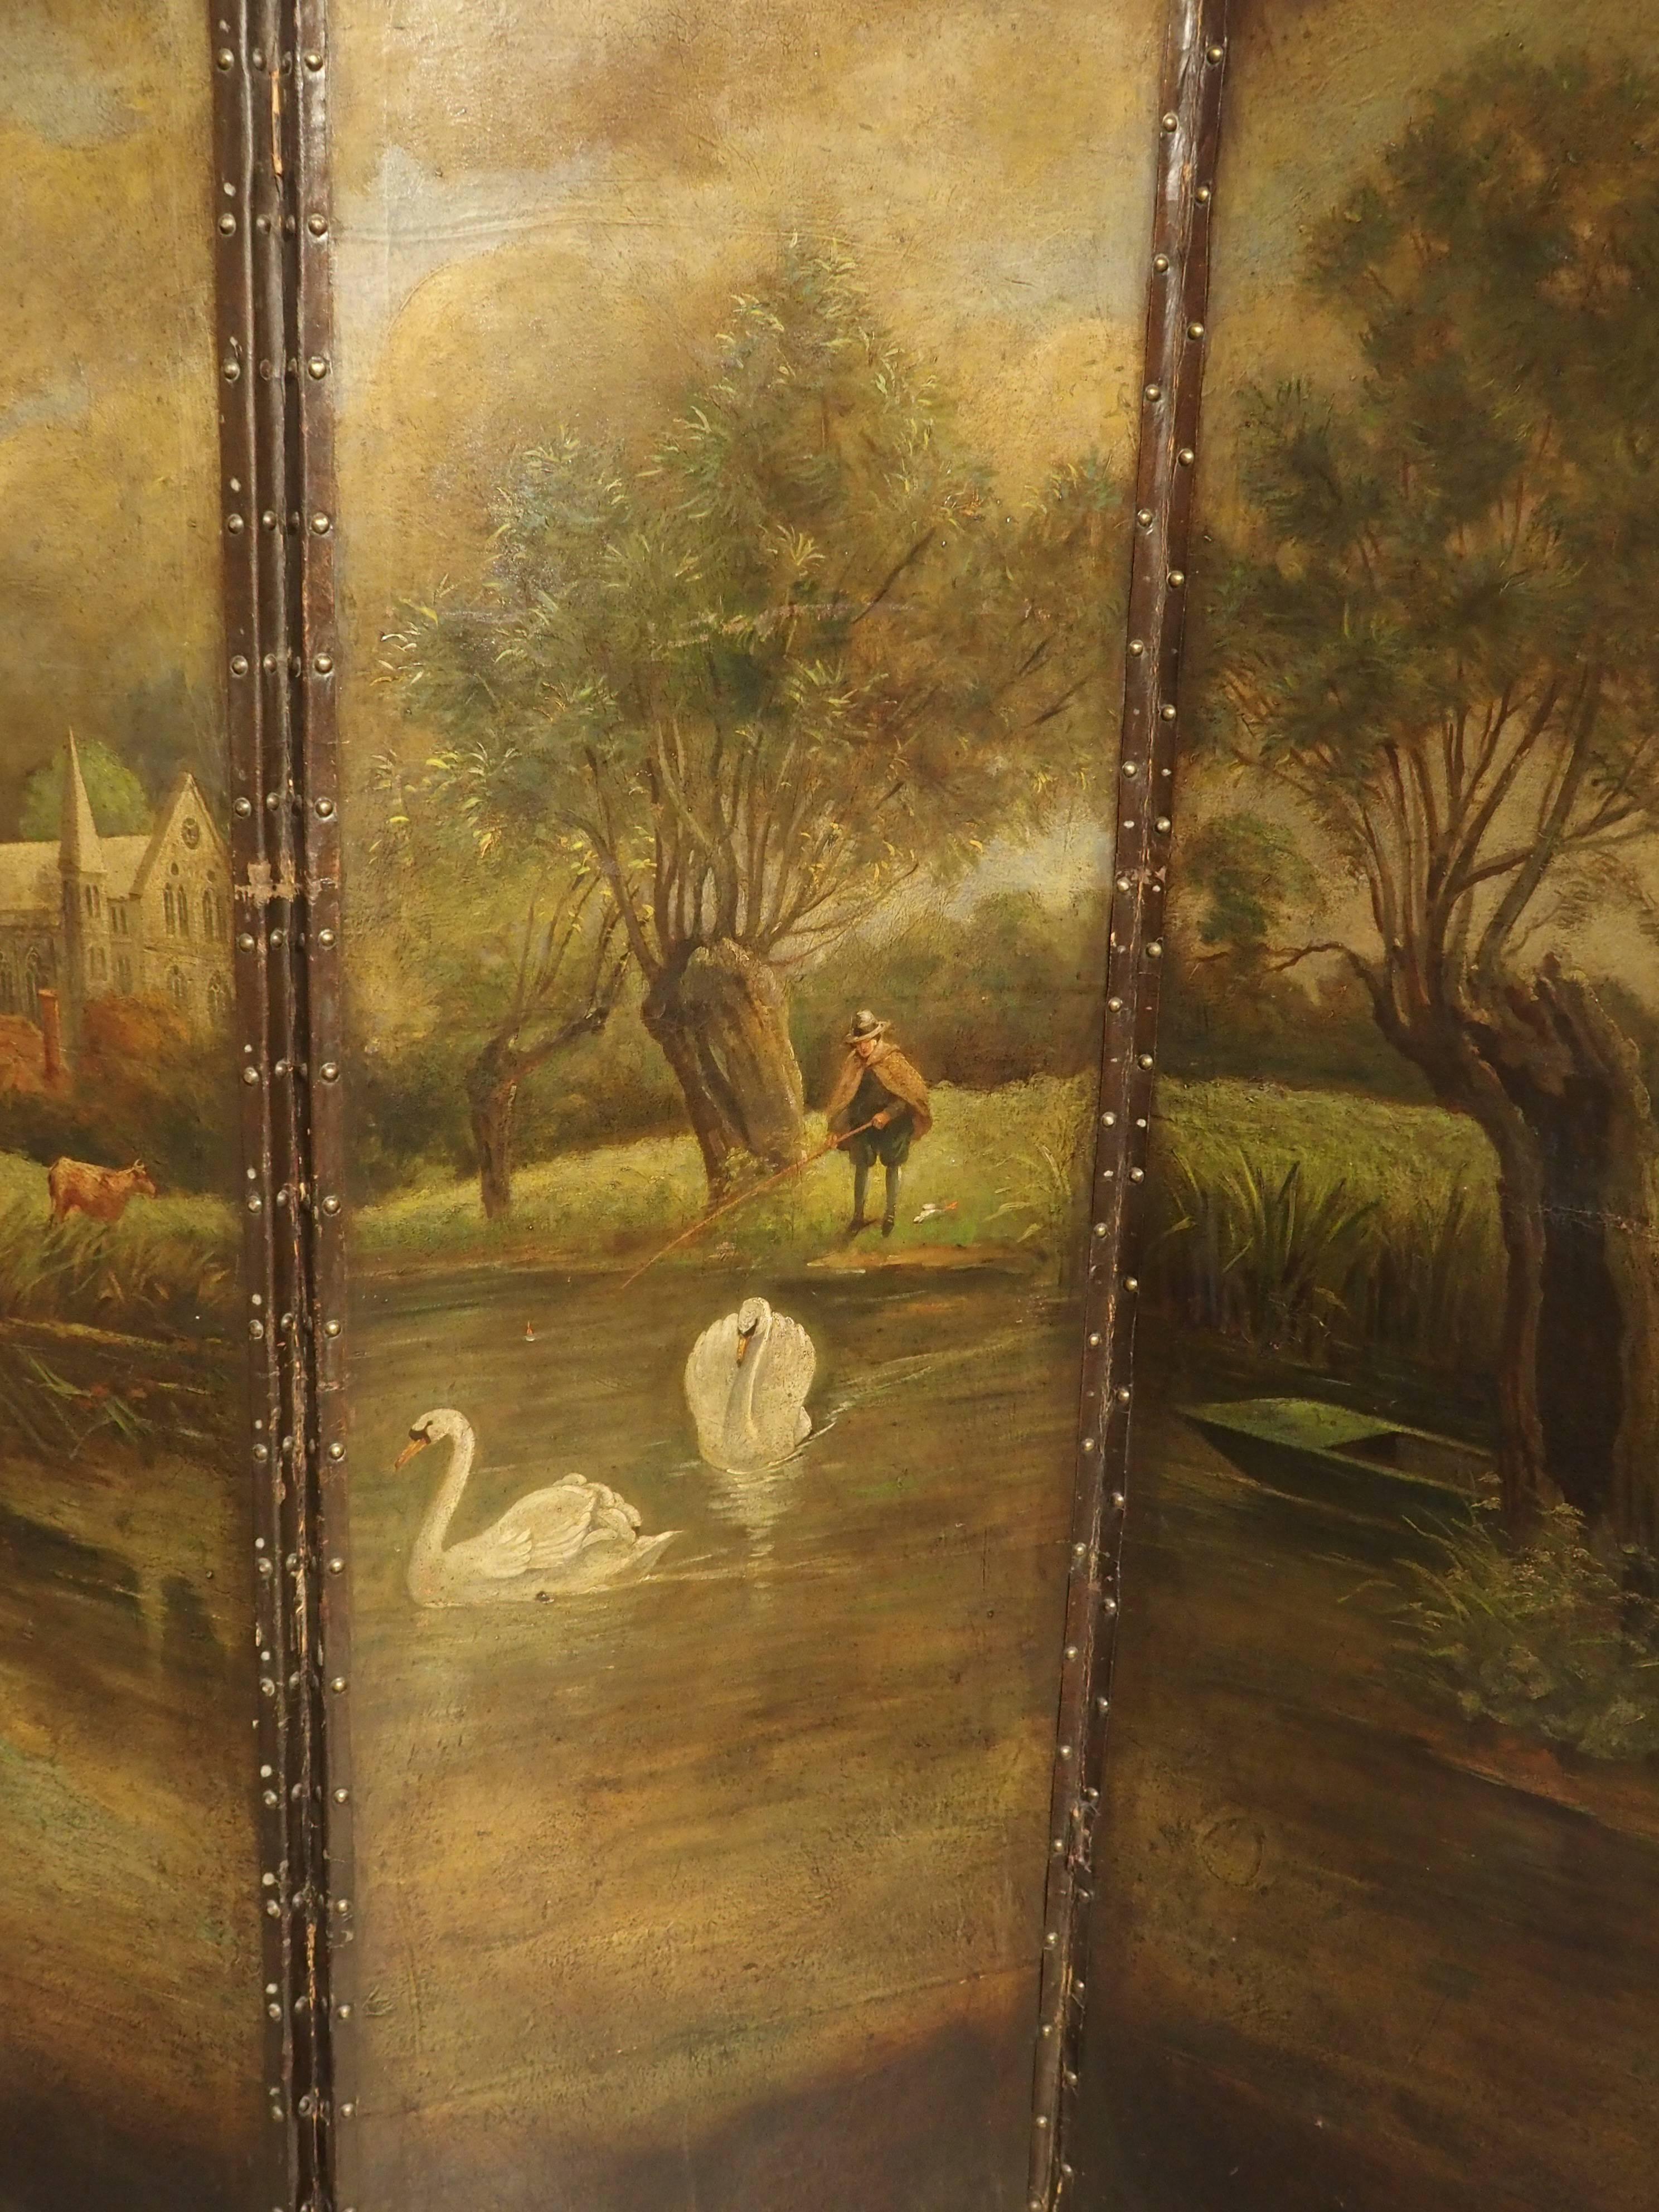 Northern France, circa 1850.

This peaceful French landscape painting has been done in oil on leather on a four panel screen or paravent. Each panel has been hinged together and framed with leather straps using brass nail heads. This beautifully